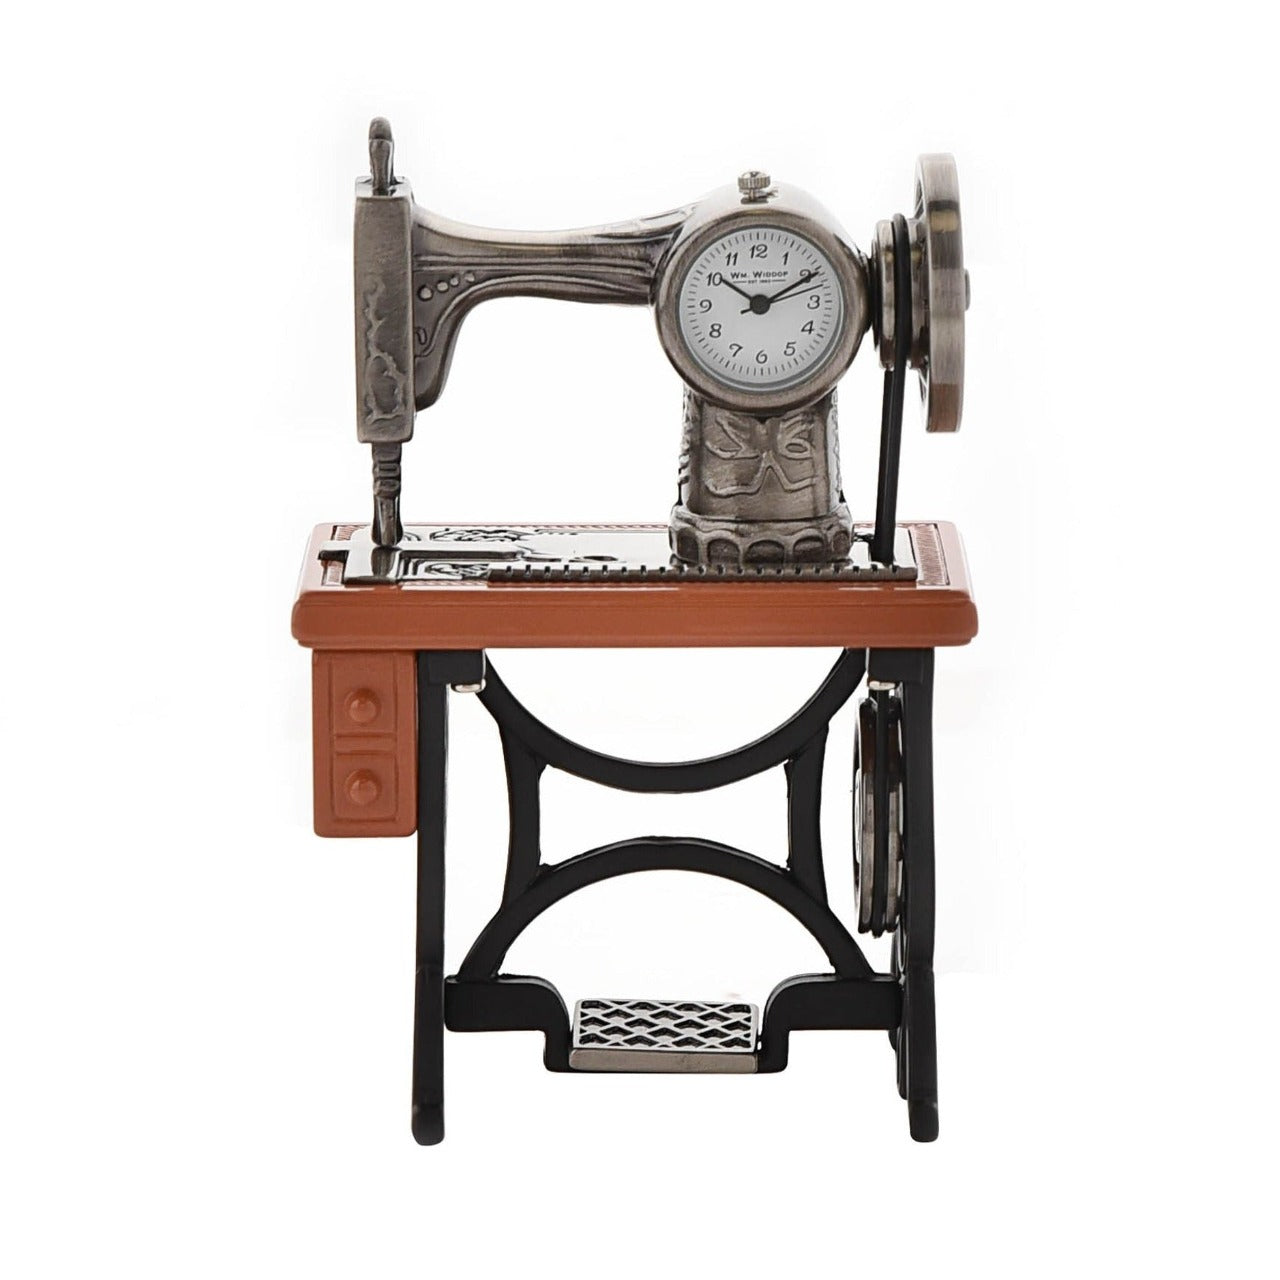 Miniature Clock - Sewing Machine  Bring a uniquely refreshing touch to the home with this stylish miniature clock made with great attention to detail.